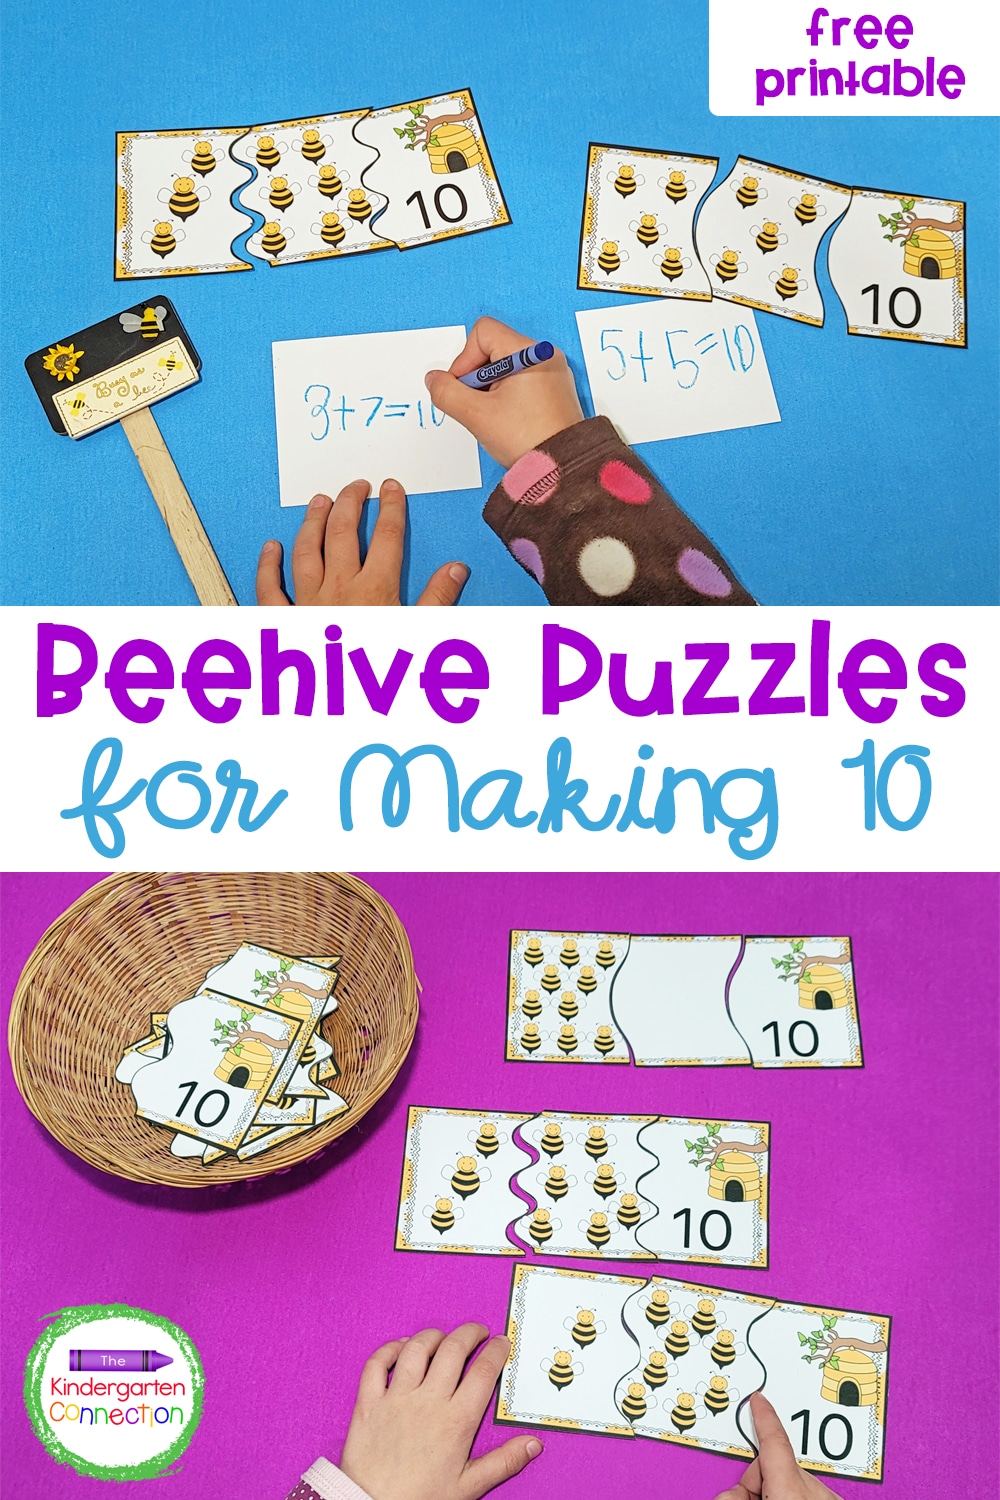 Work on sums of 10 in a fun way with these free Beehive Puzzles for Making 10! Perfect for math centers in Pre-K and Kindergarten!